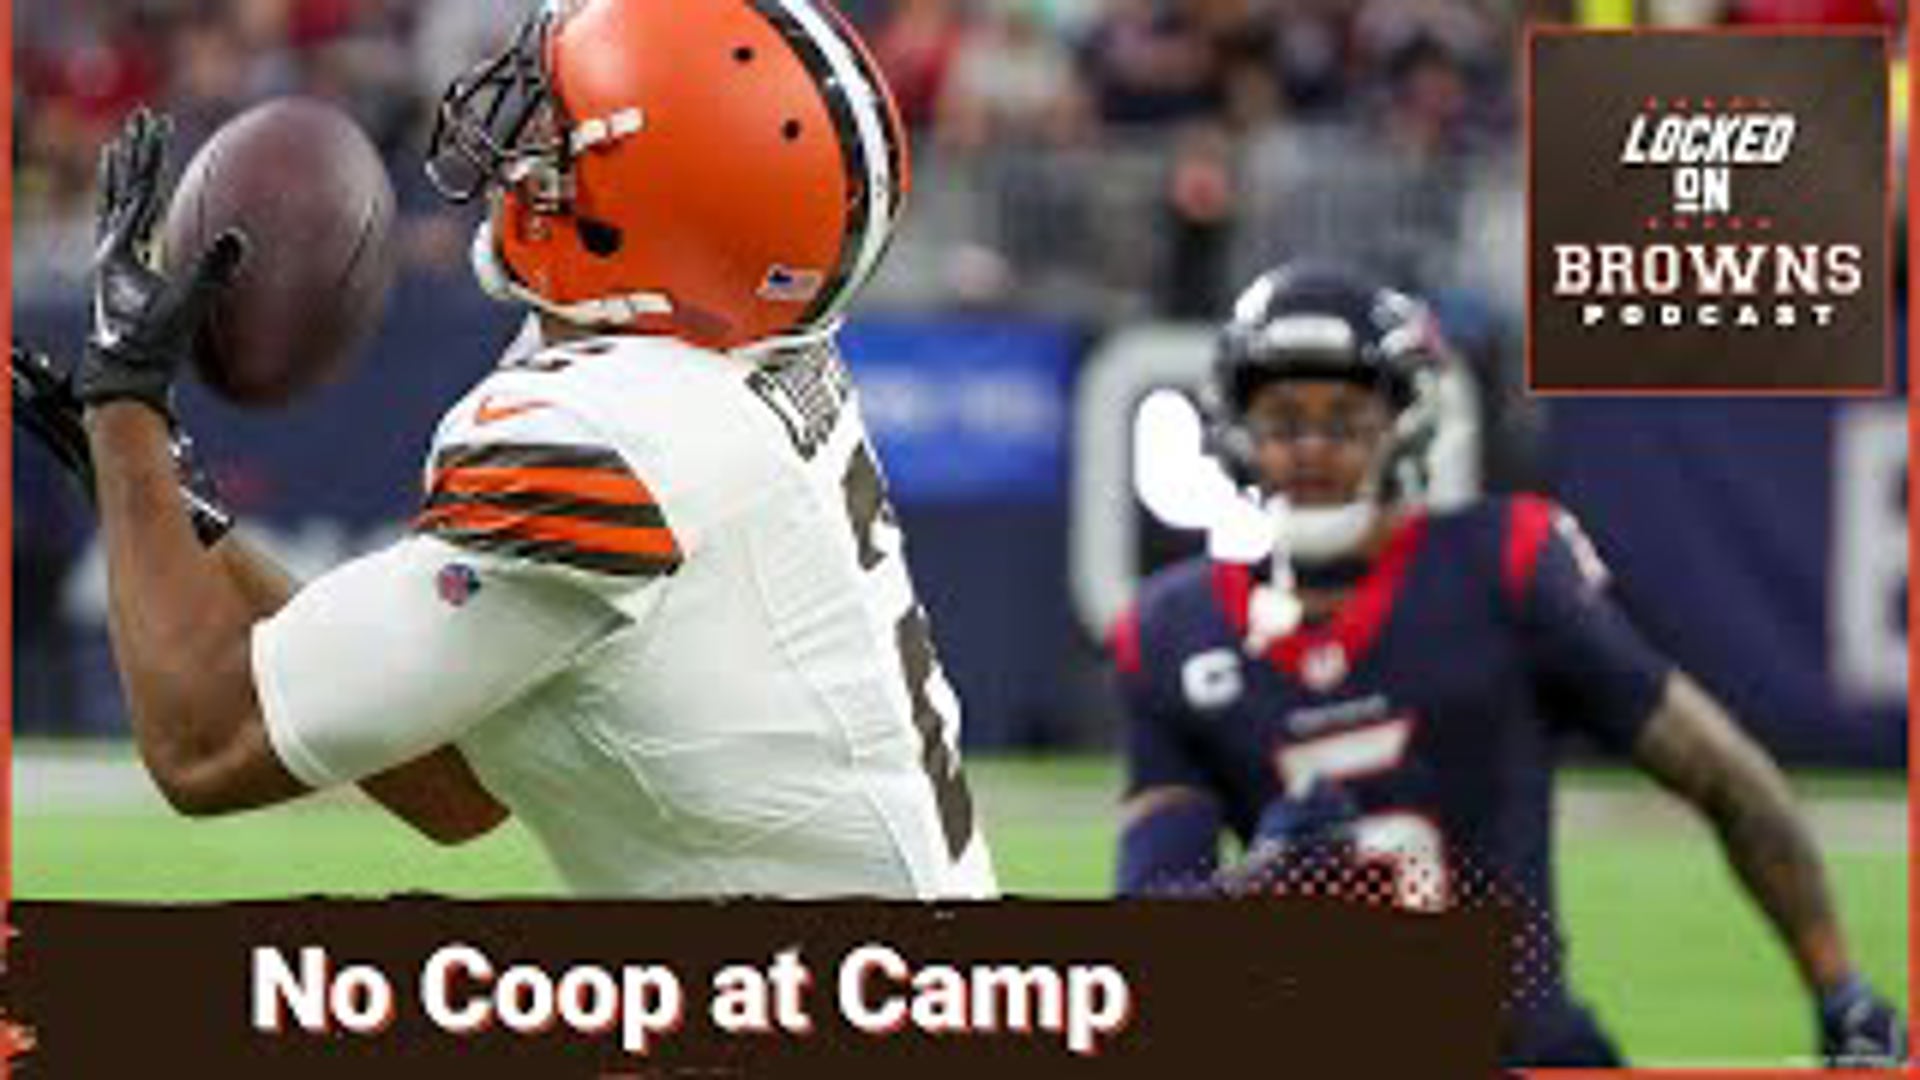 Cleveland Browns wide receiver Amari Cooper did not report for mandatory mini-camp, and look at Nick Chubb for one of the main reasons why.